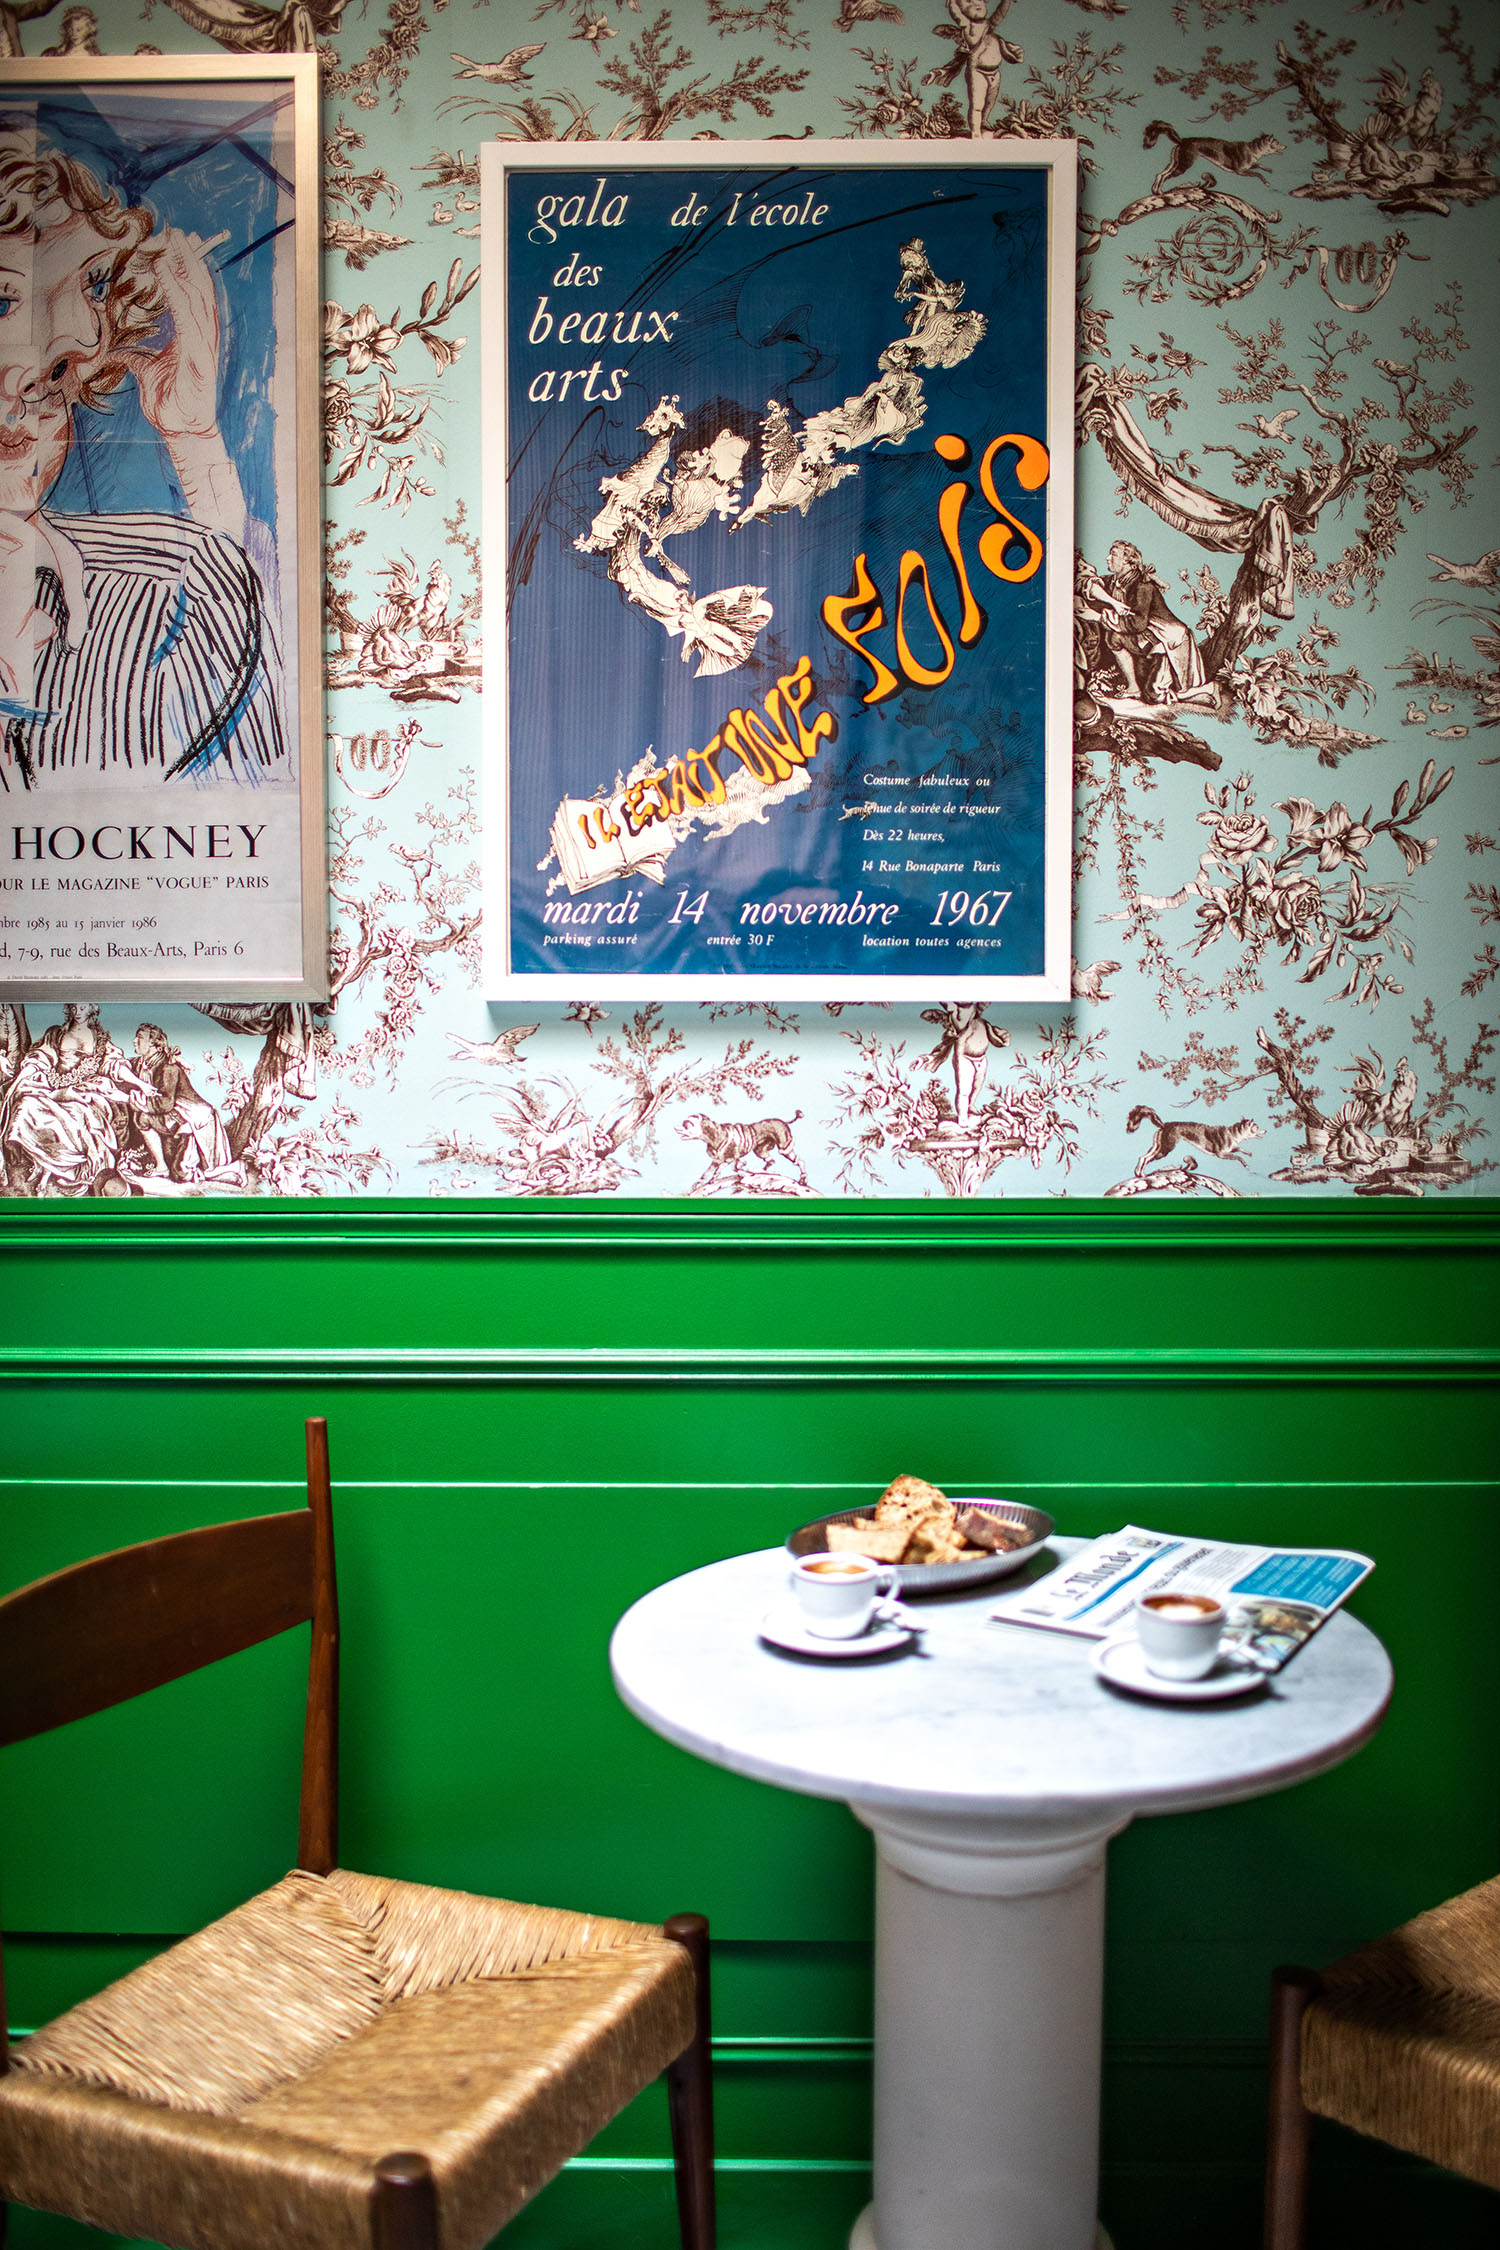 The maximalist breakfast room at Hotel les Deux Gares with blue + brown toile de juoy walls accented with bright green wainscoting and hand-illustrated posters from the 1960's